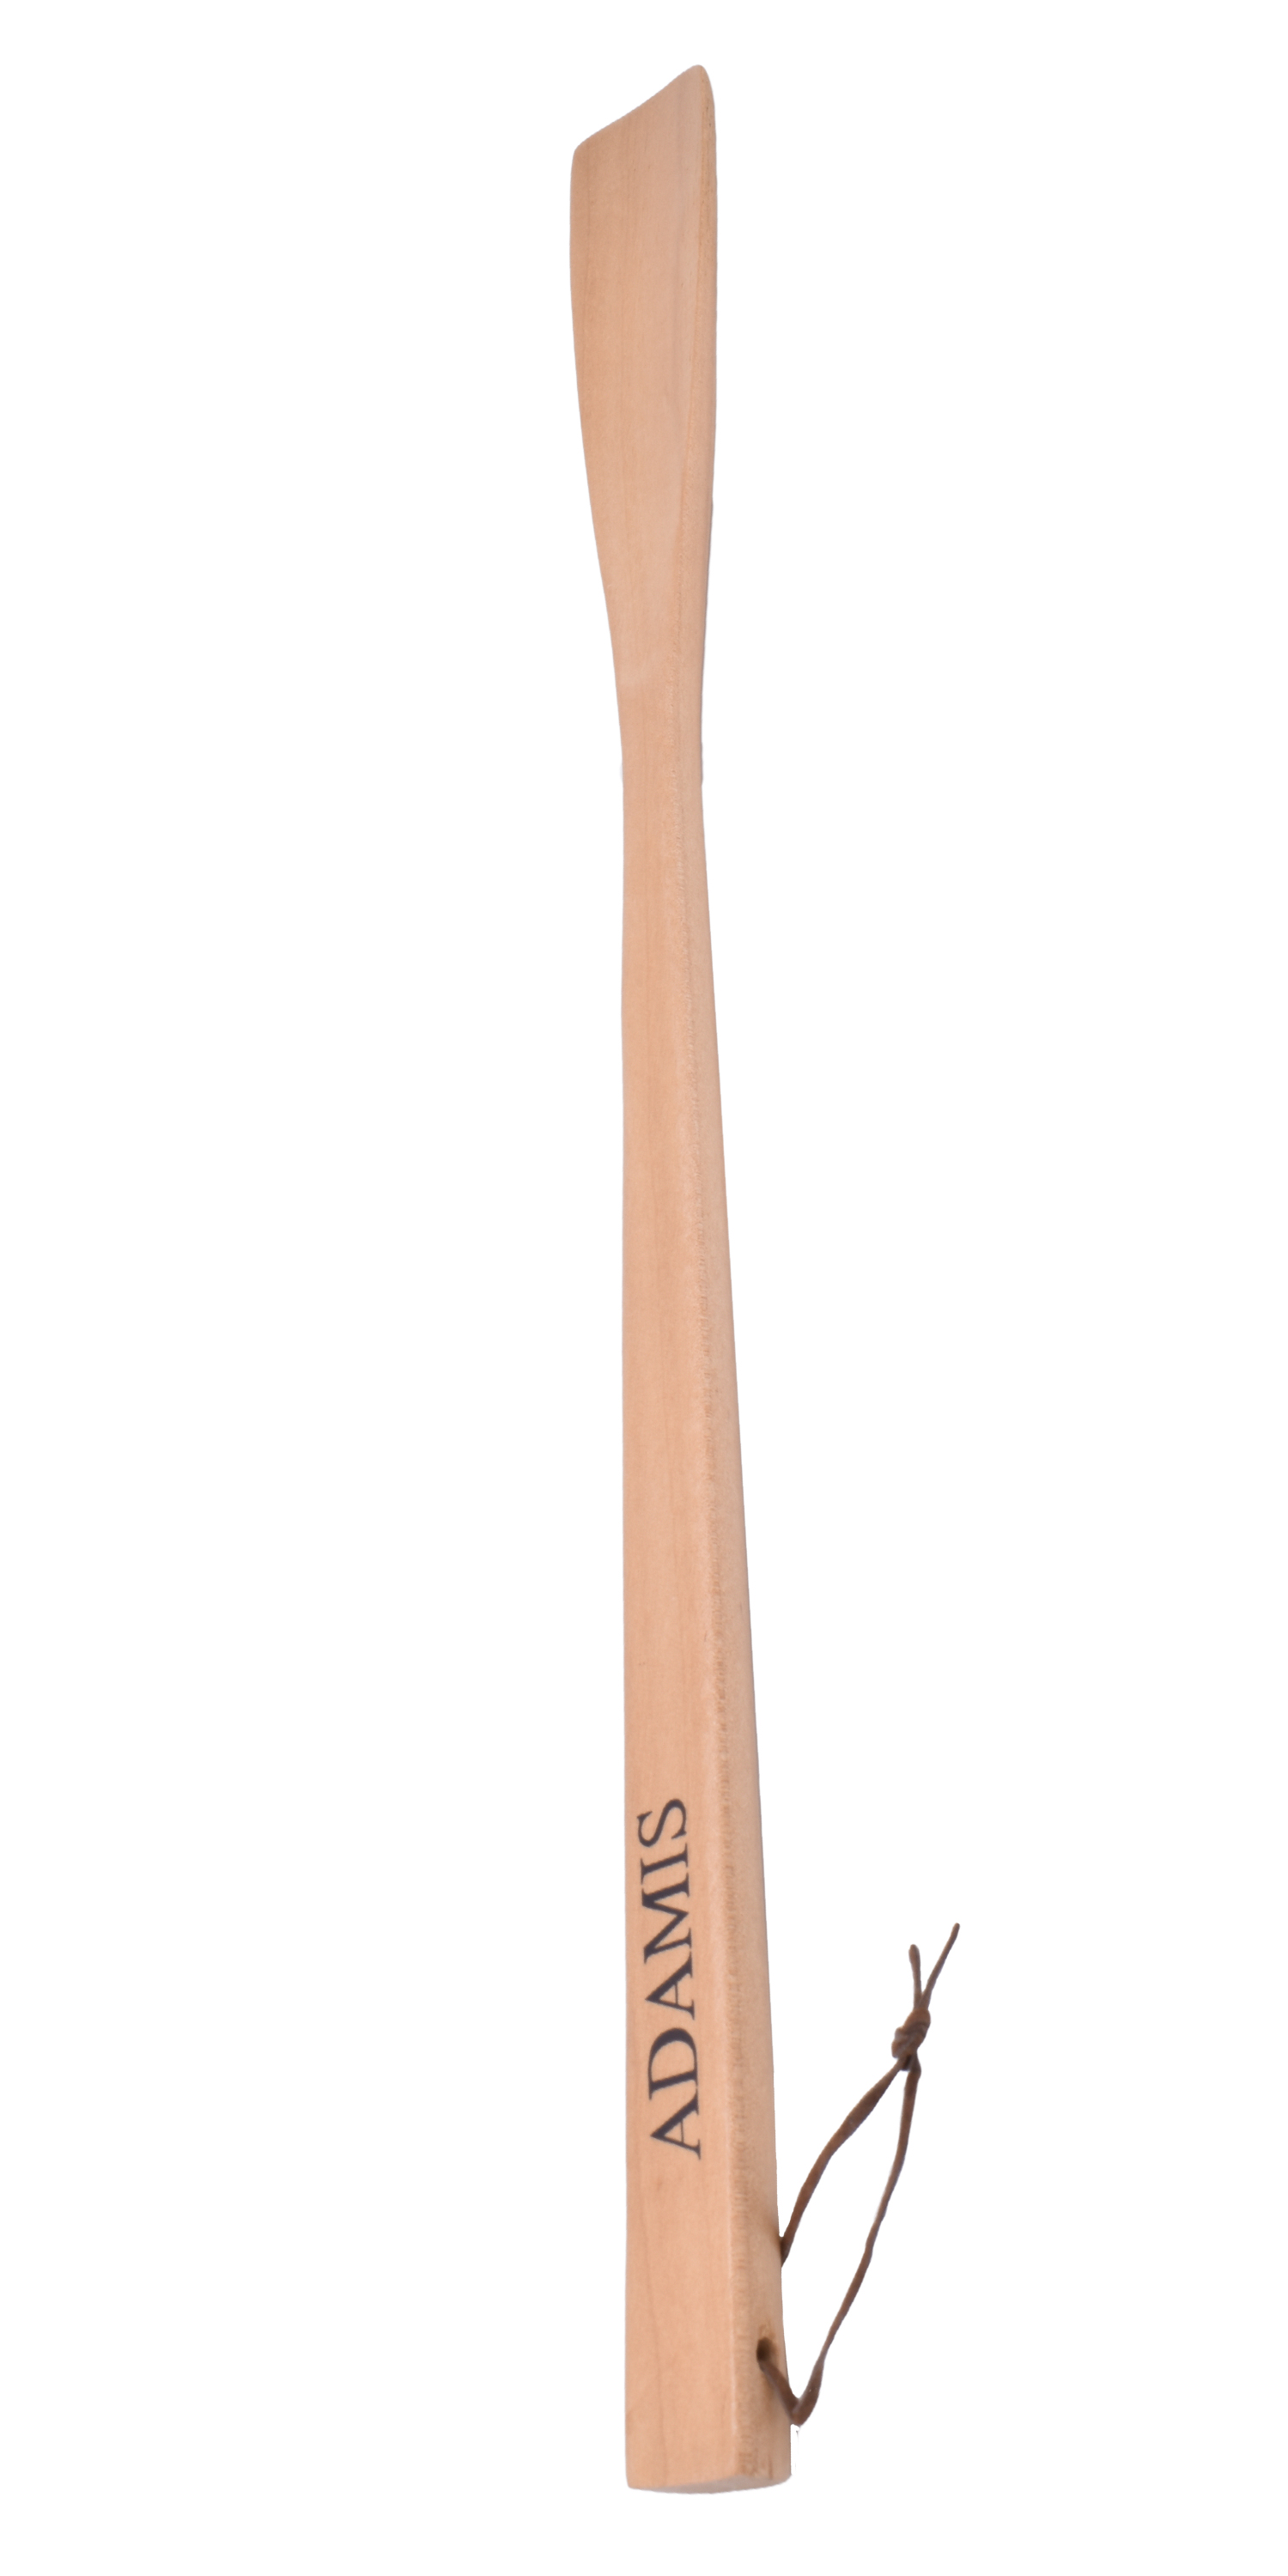 HS1--Shoe horn in beautiful wood finish with Adamis signature - Assorted Color